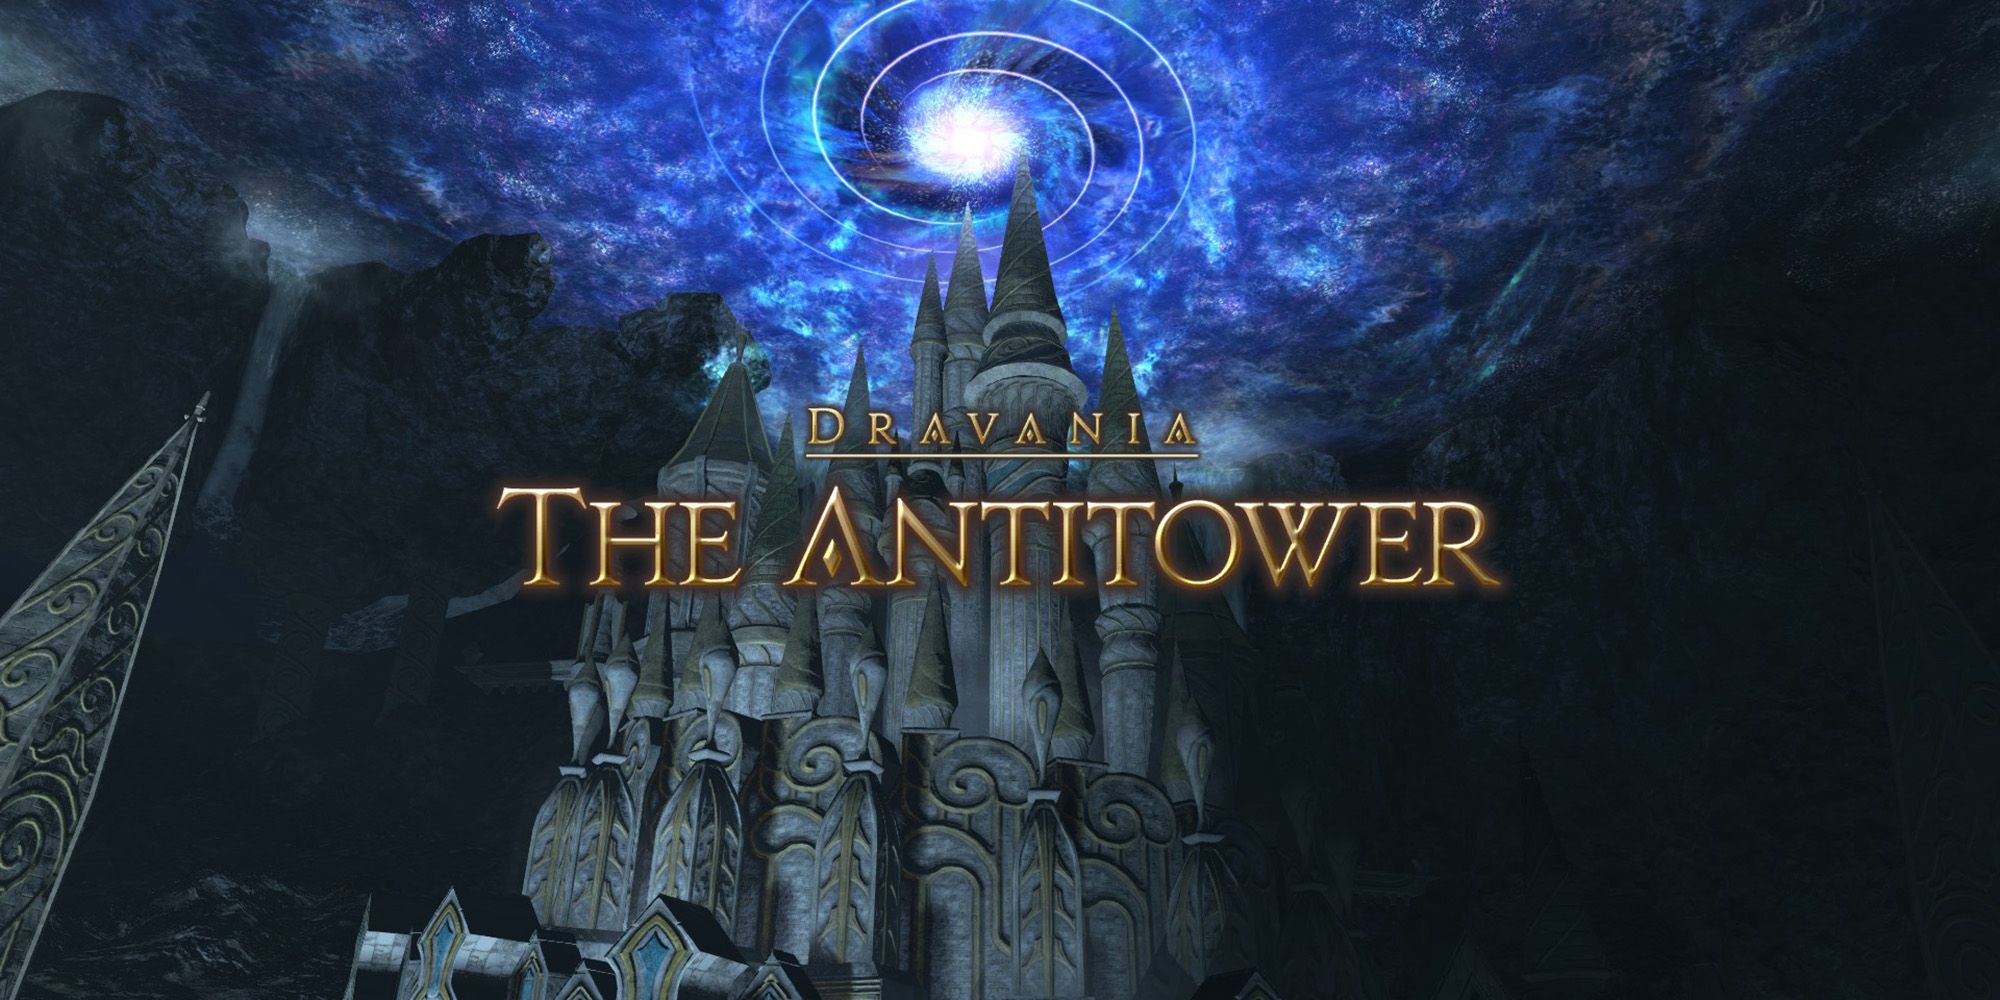 Final Fantasy 14 The Antitower Dungeon Guide